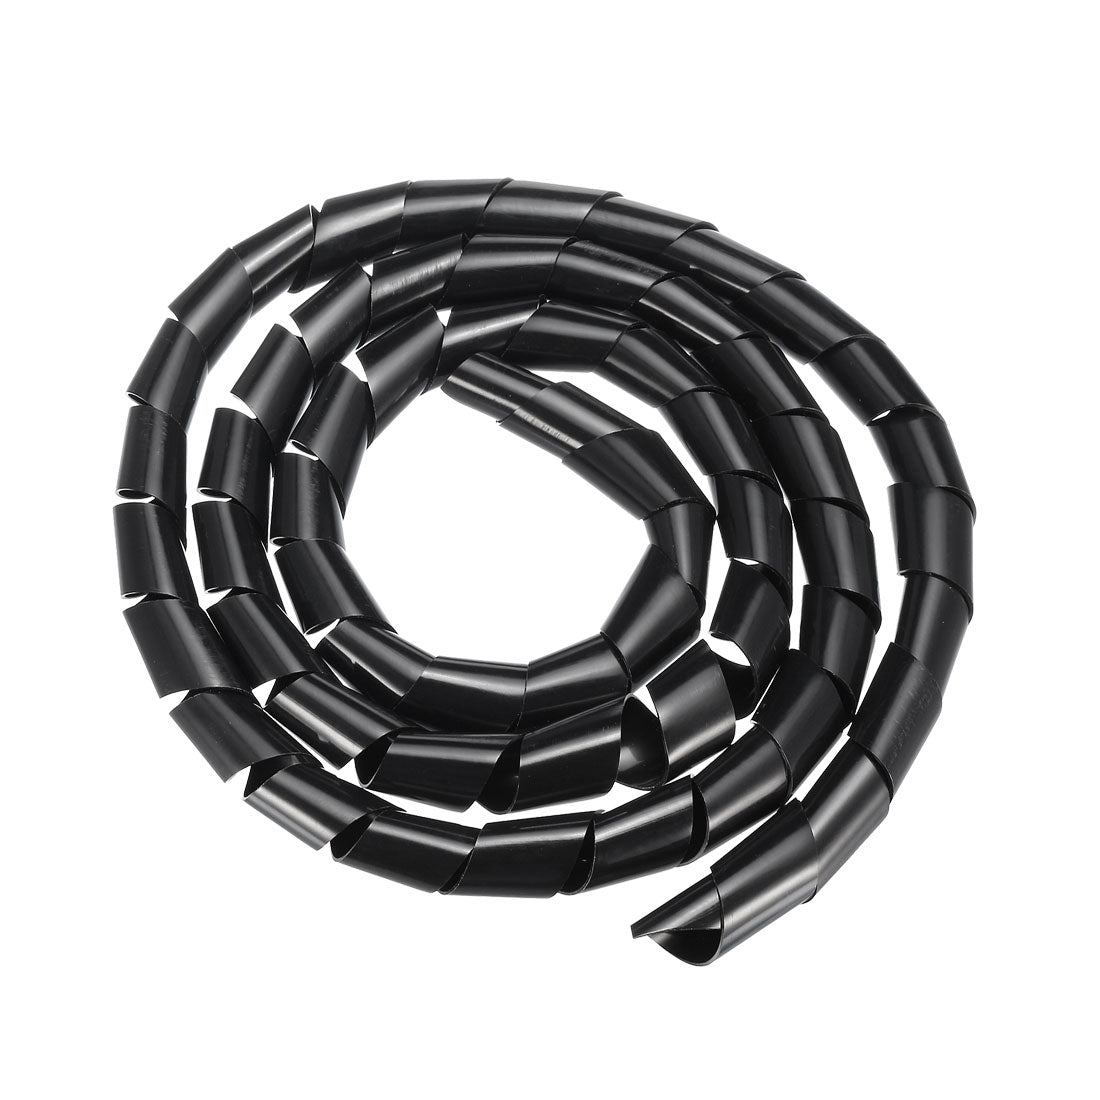 uxcell Uxcell 26mm Flexible Spiral Tube Cable Wire Wrap Computer Manage Cord 1.5M Length Black